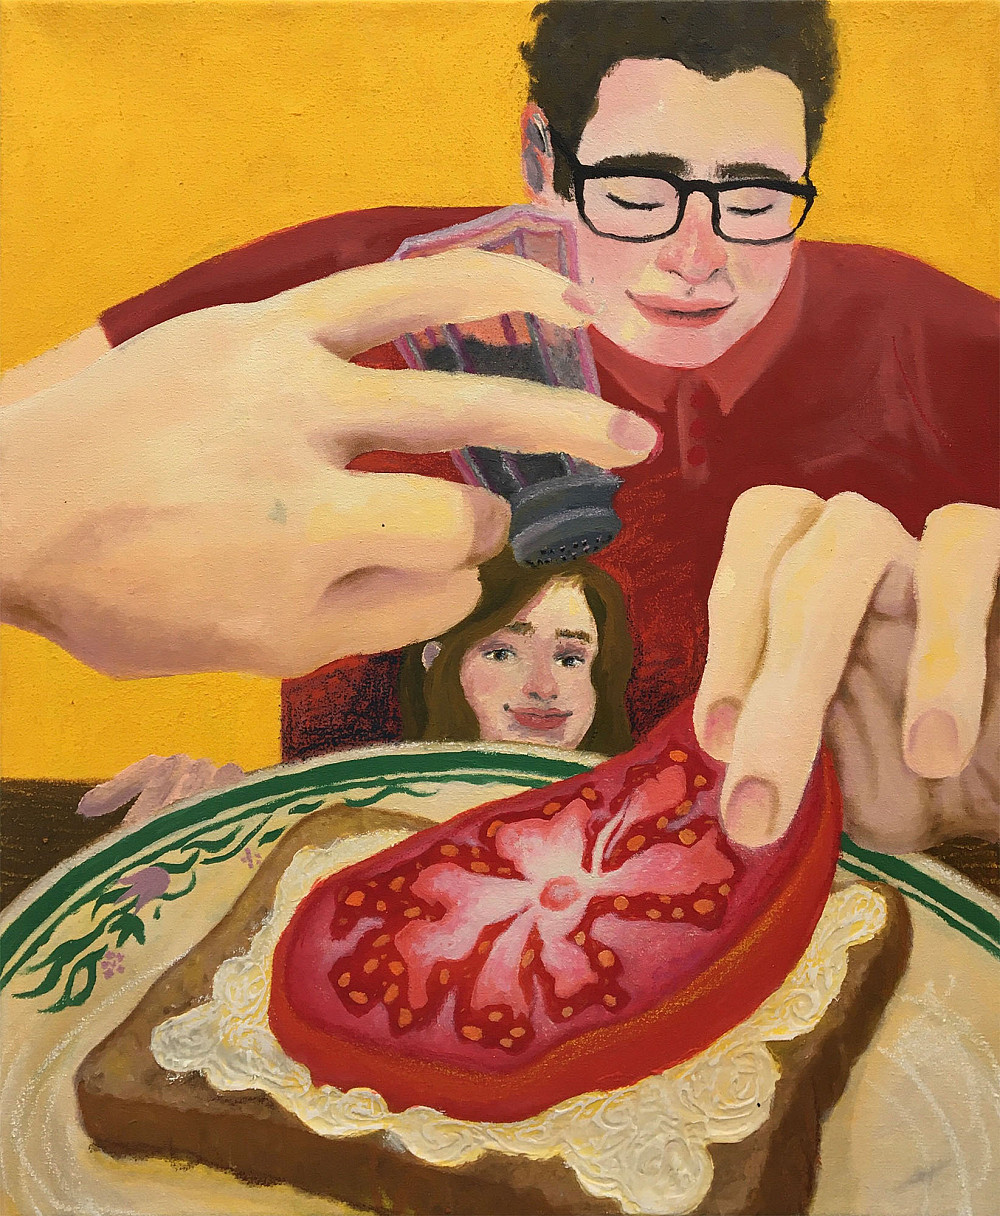 Sarah Couture, Tomato Sandwich, 2020, Oil and oil stick on canvas, 20 x 24 ©Sarah Couture